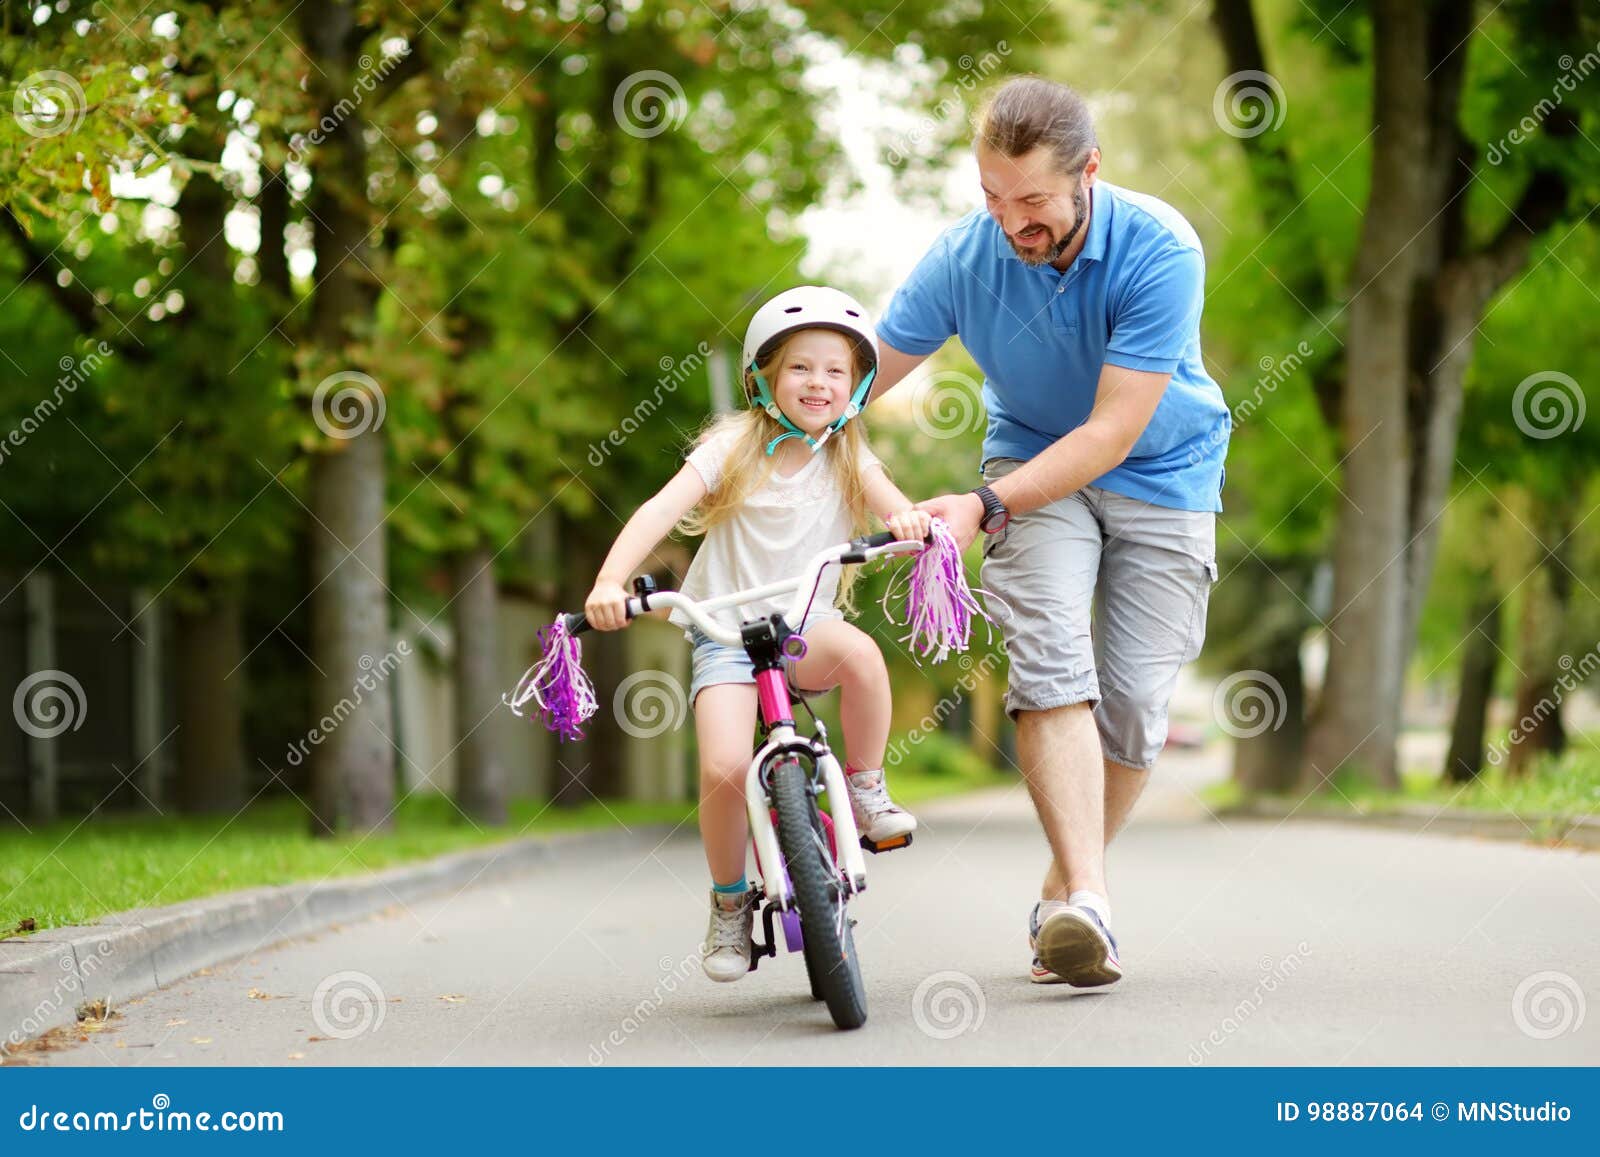 happy father teaching his little daughter to ride a bicycle. child learning to ride a bike.